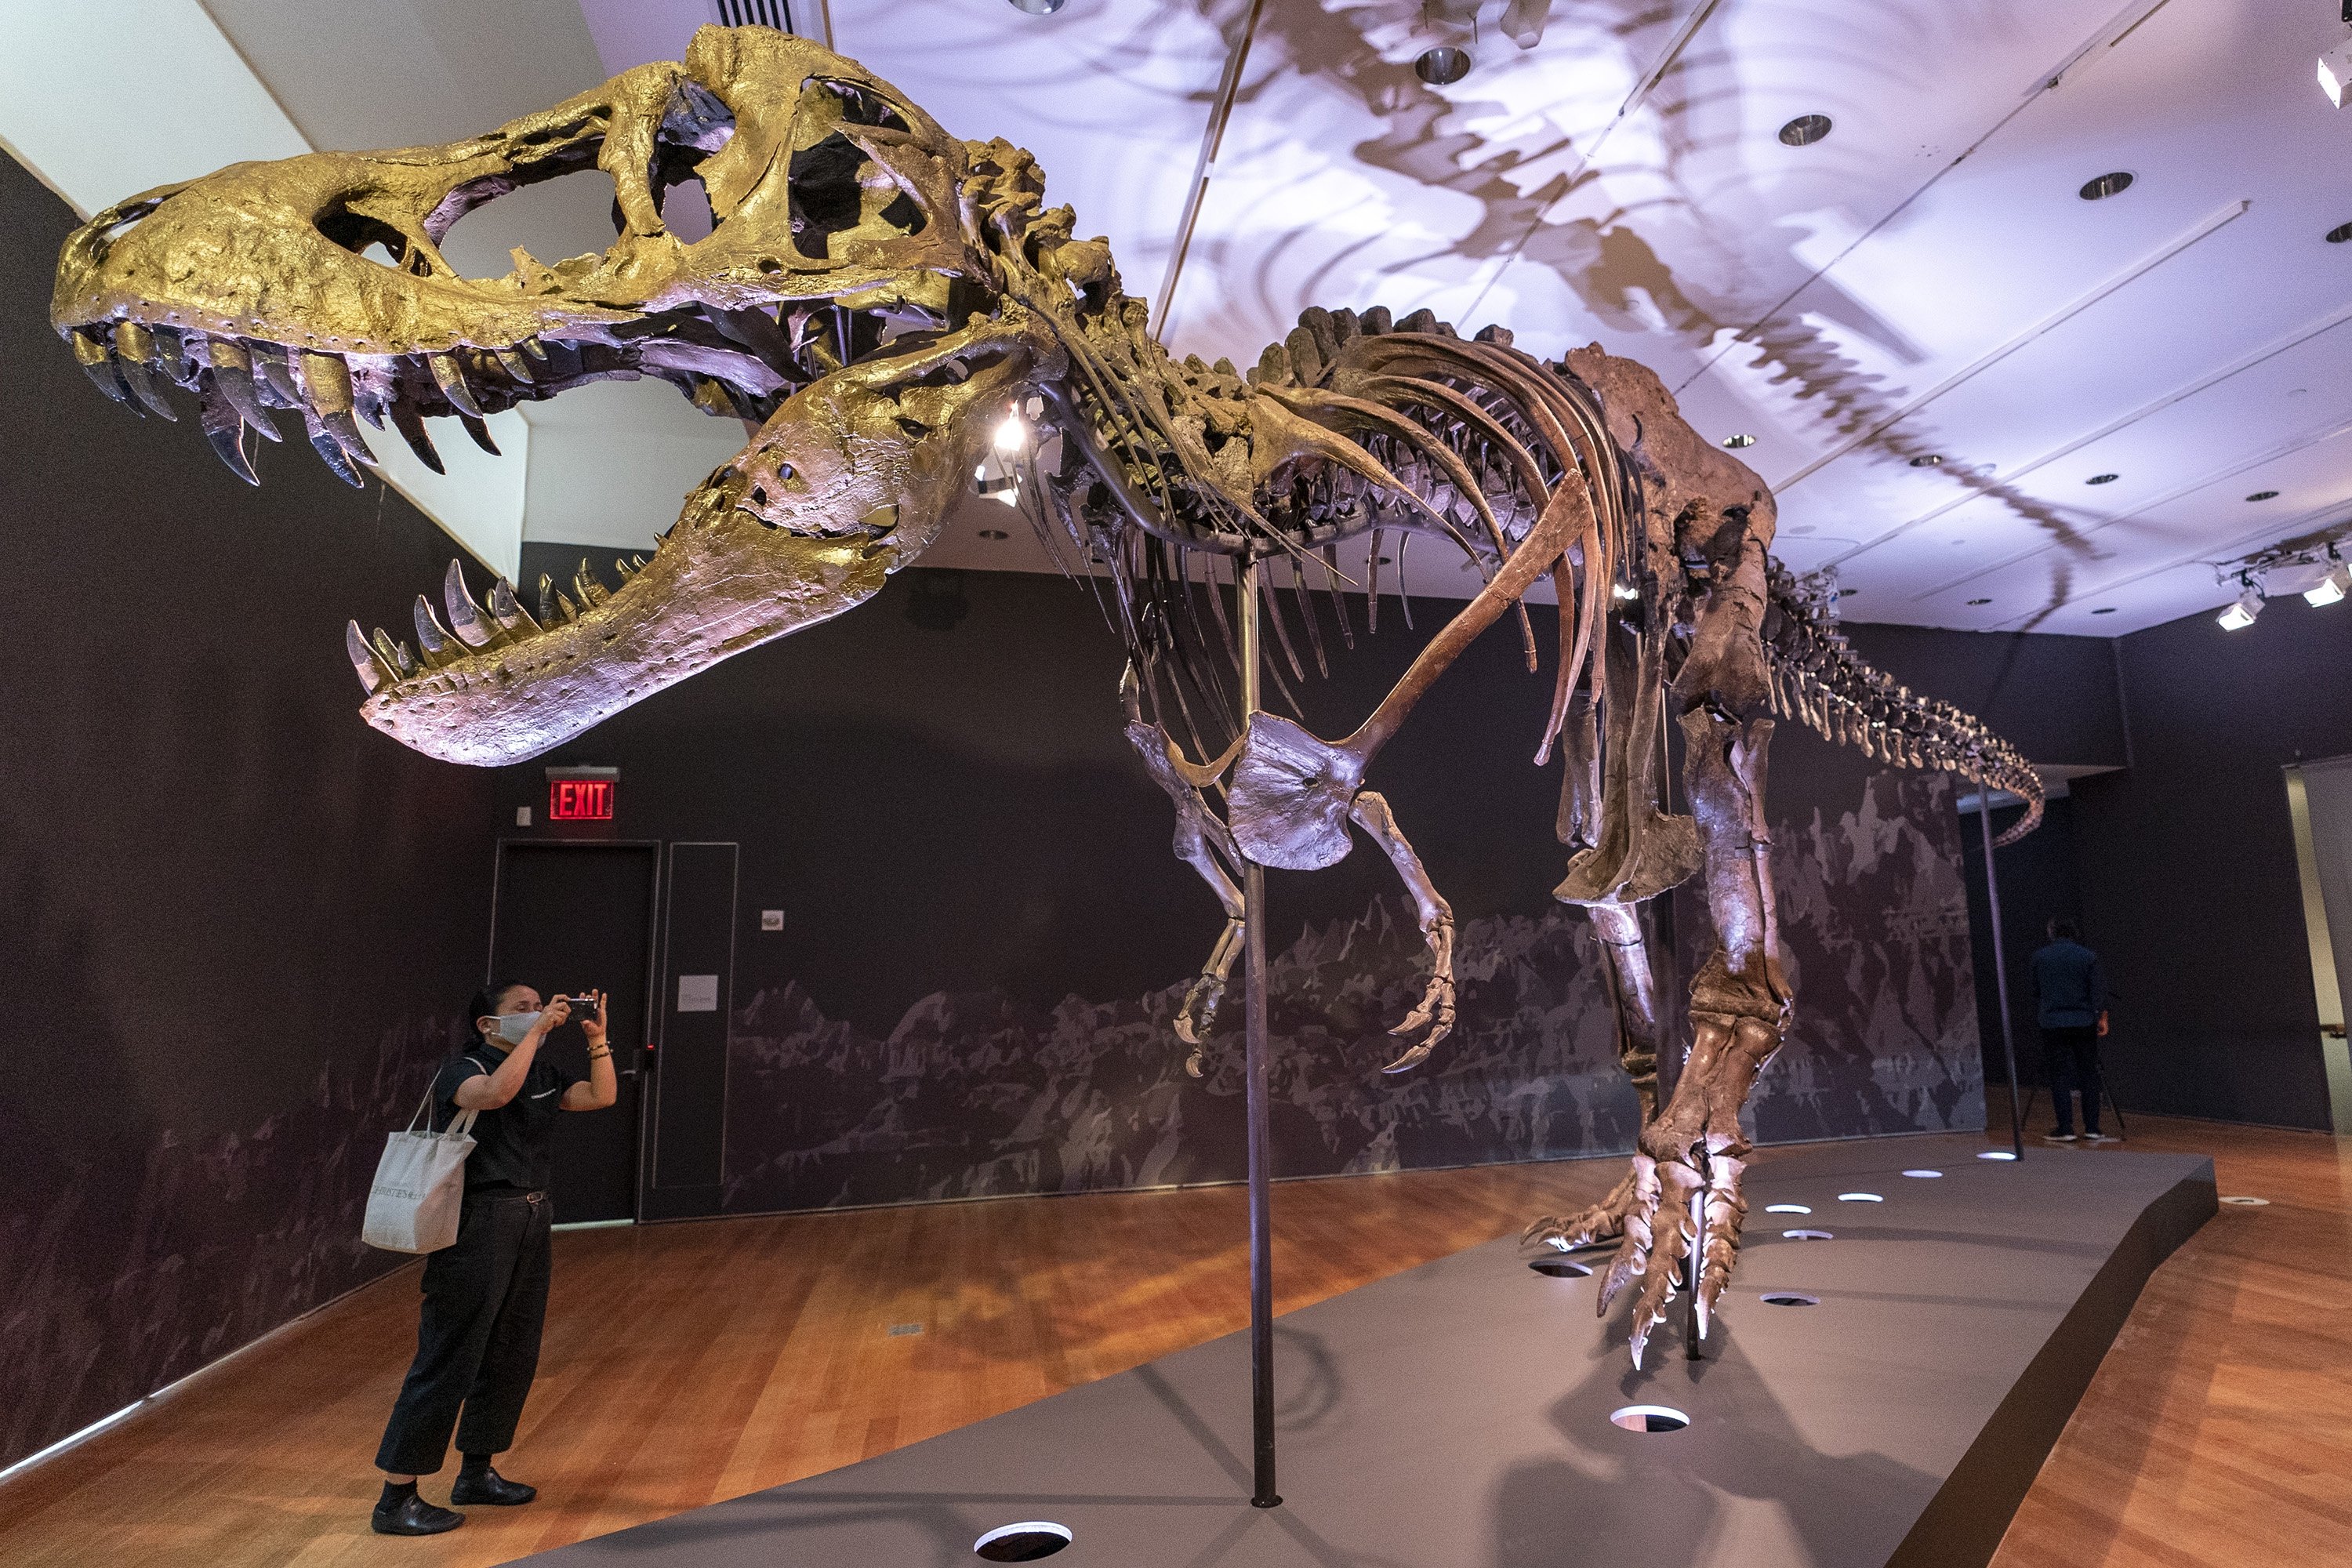 T-Rex fossil sells for record-breaking $ million | Daily Sabah